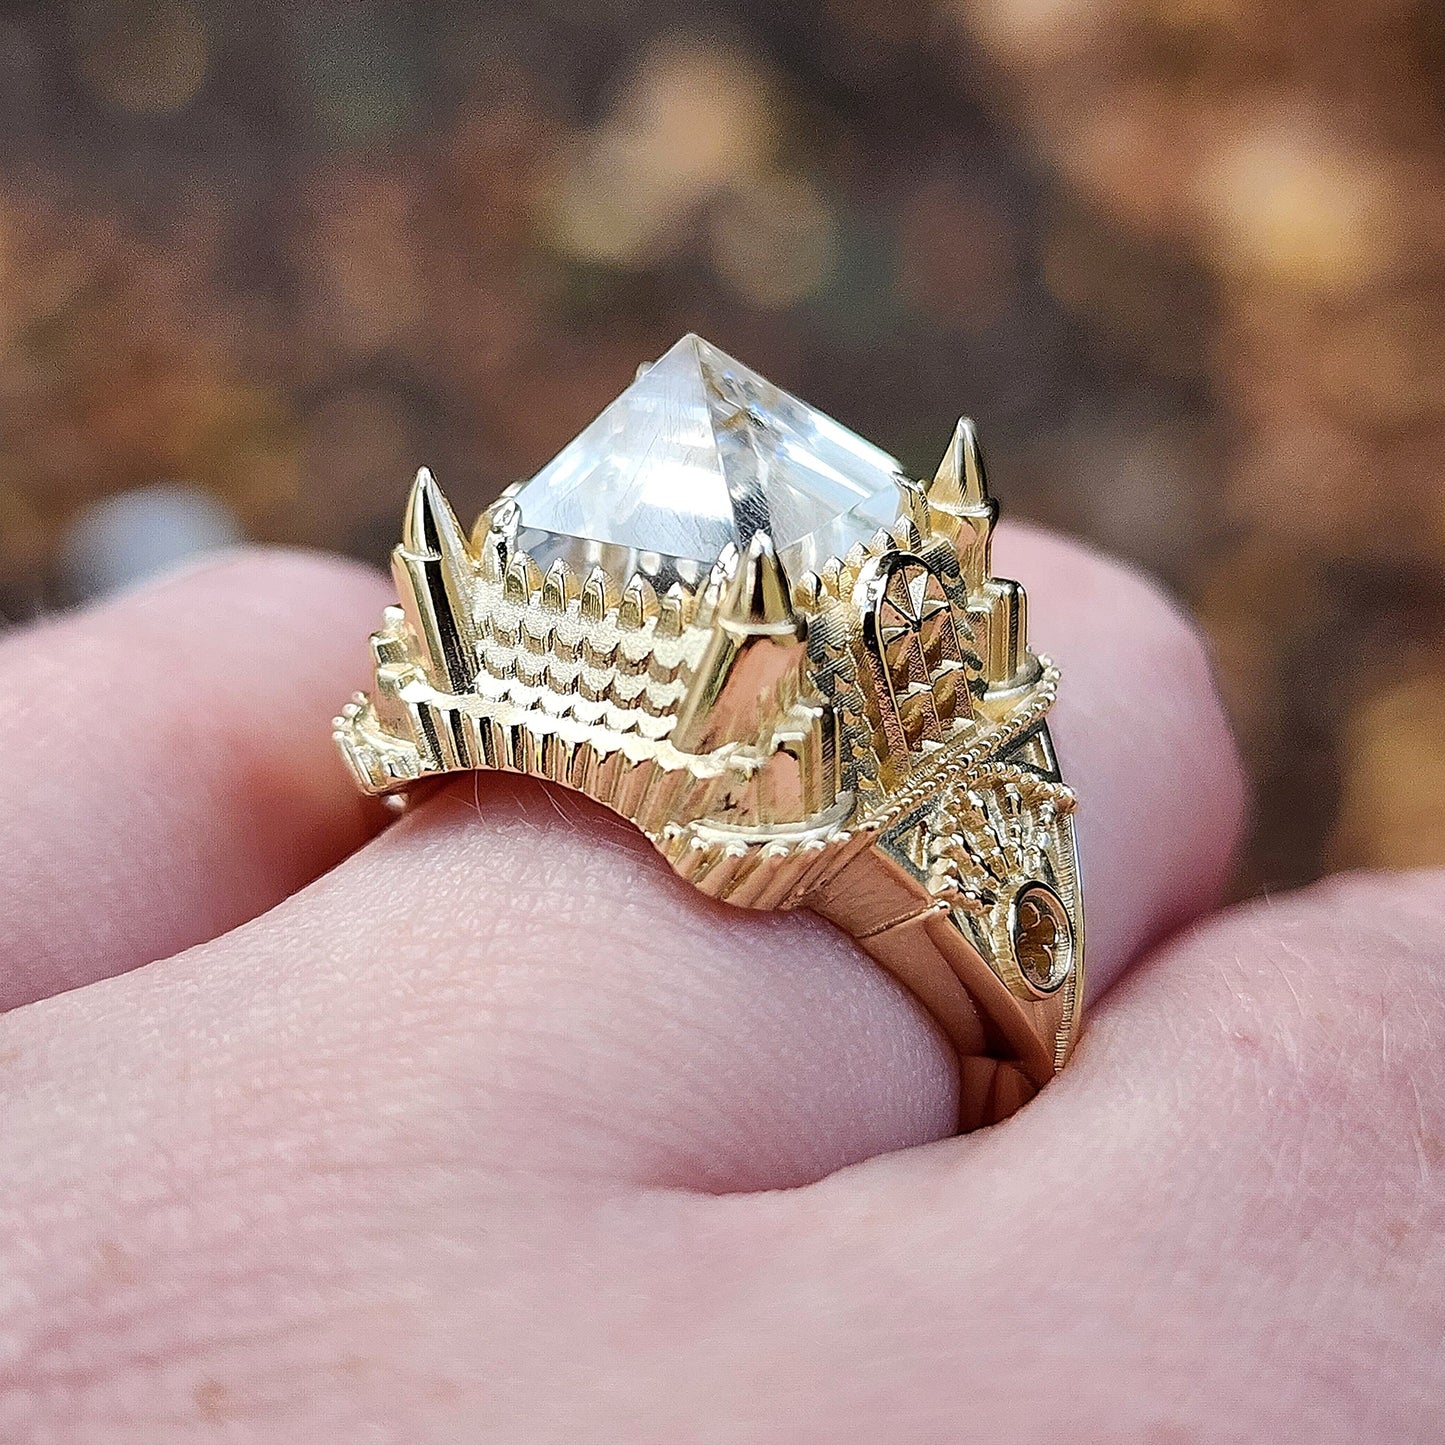 Ready to Ship Size 6-8 14k Gold Haunted Castle Tower Ring with Pyramid Quartz and Hidden Skull Gothic Cocktail Ring Spooky Halloween Jewelry